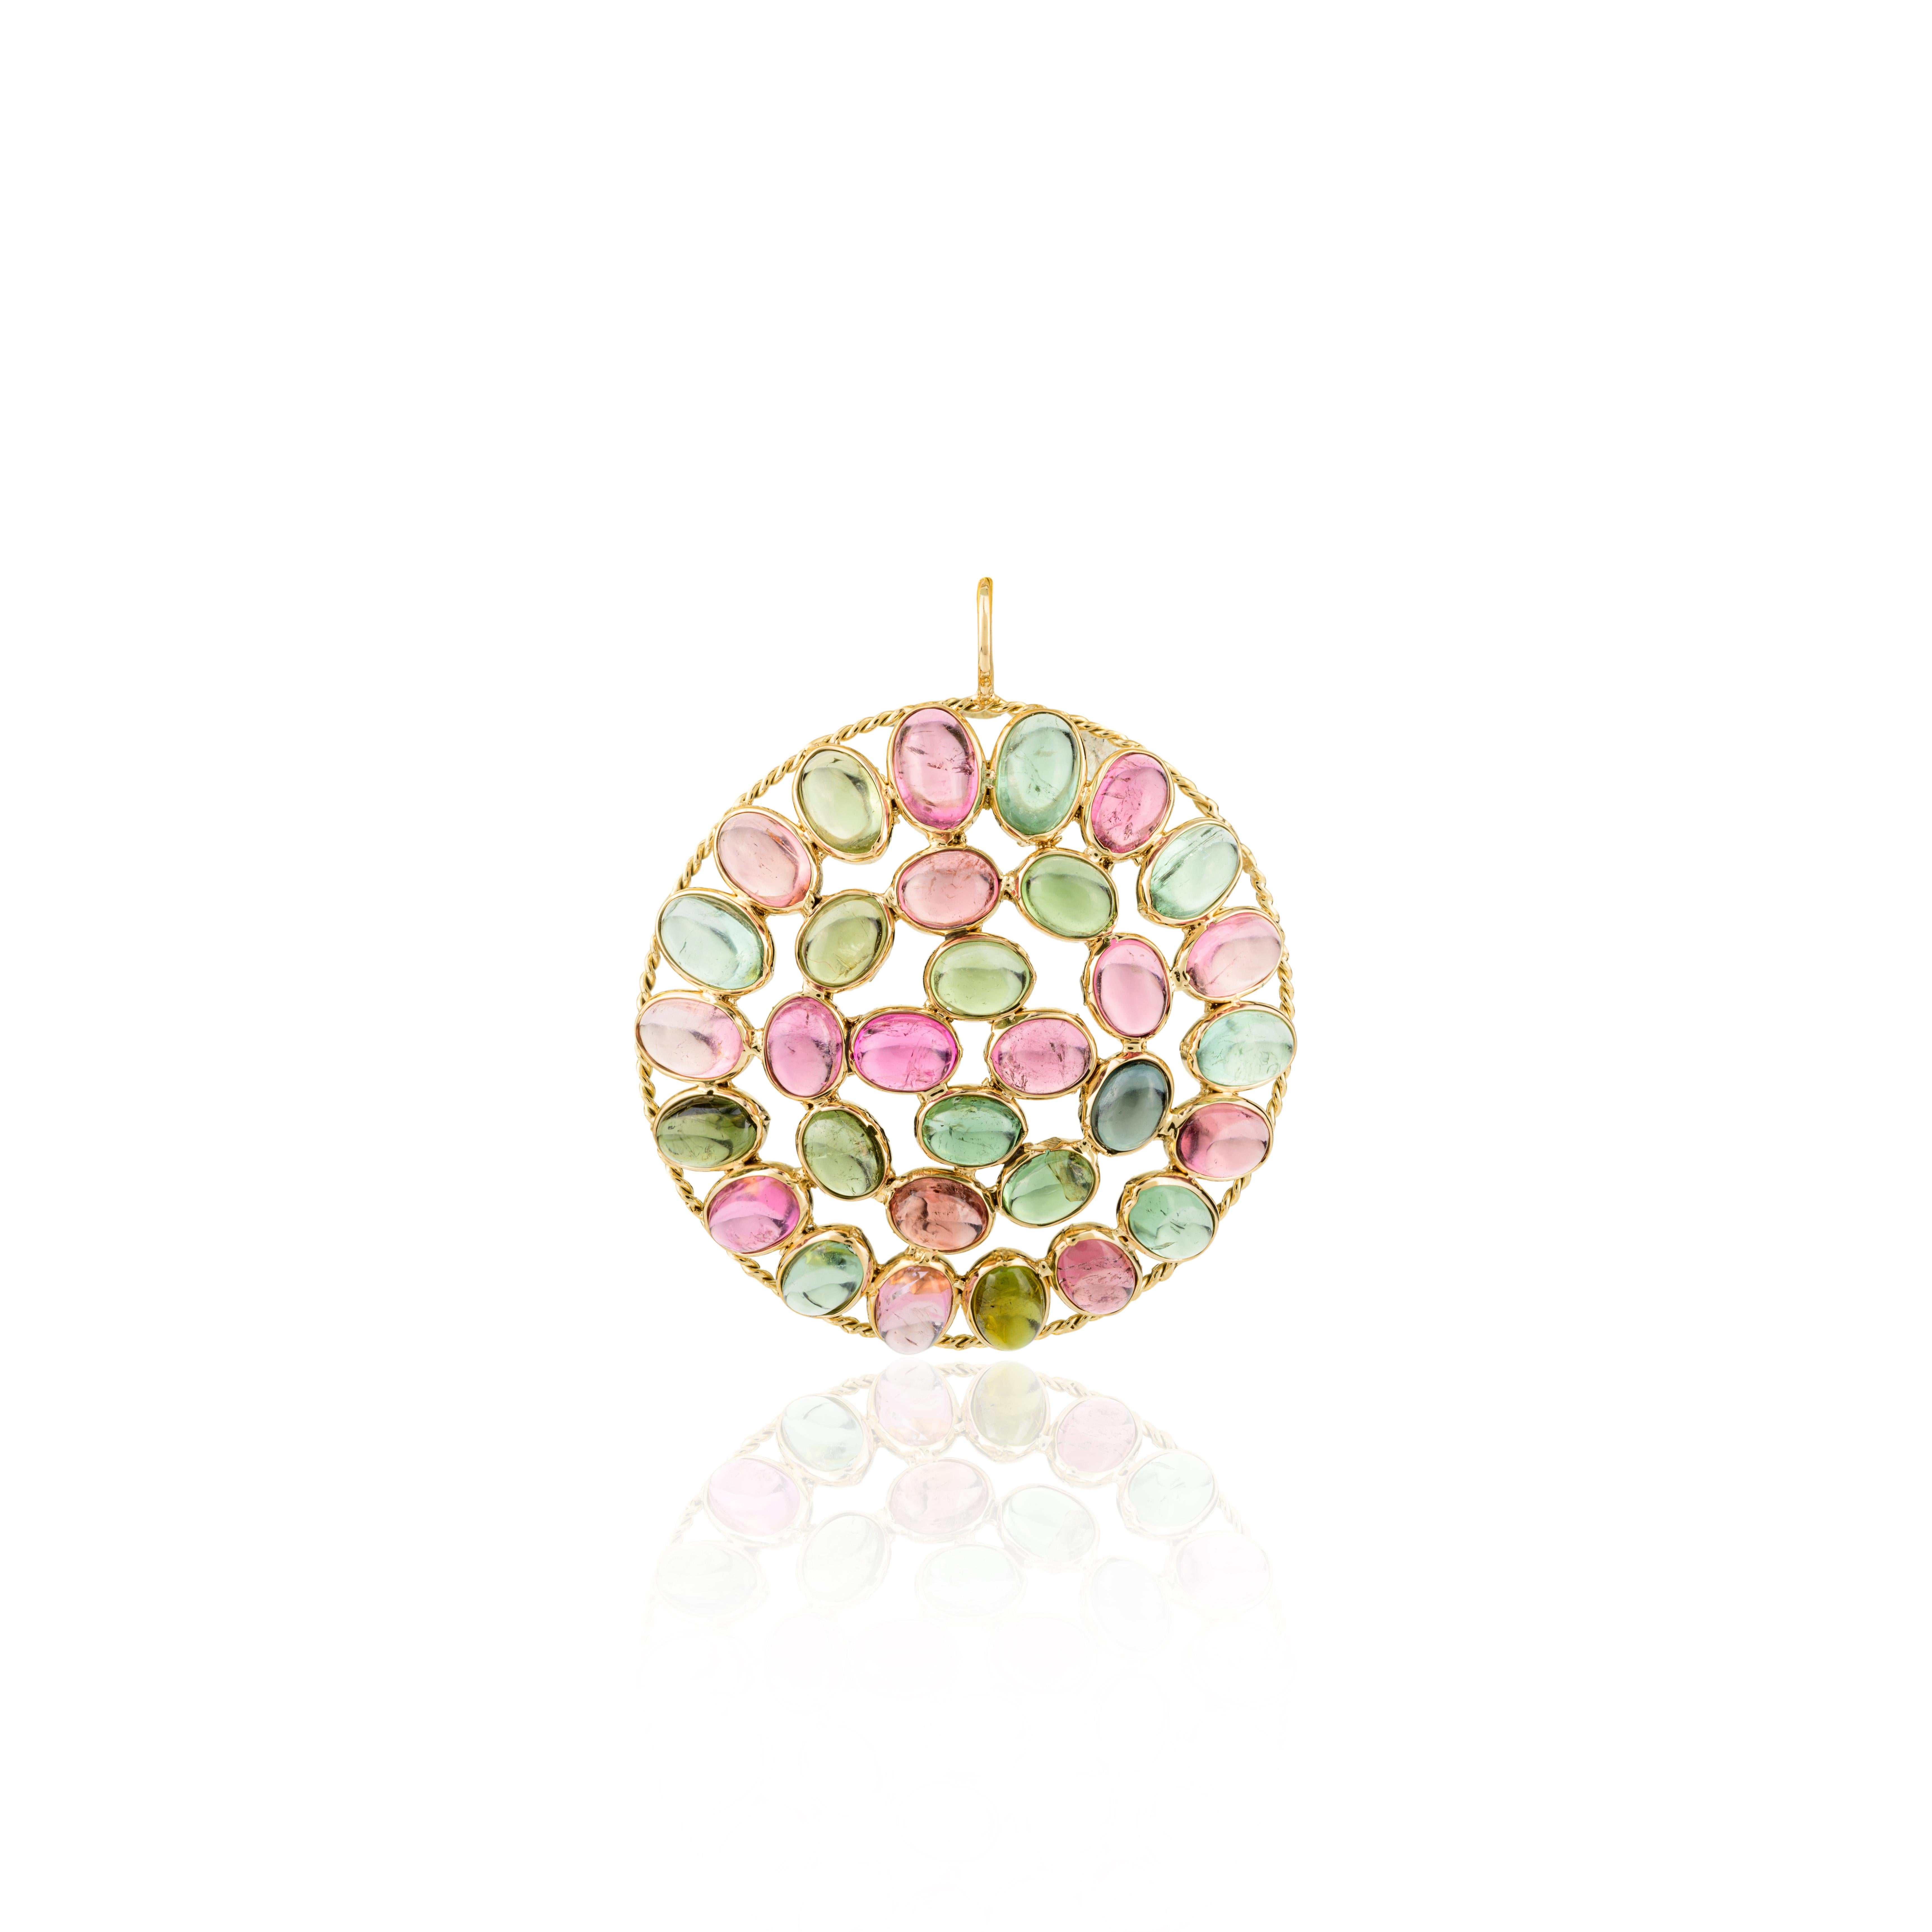 Statement Multi Tourmaline Round Shape Pendant in 18k Yellow Gold for Mom For Sale 2